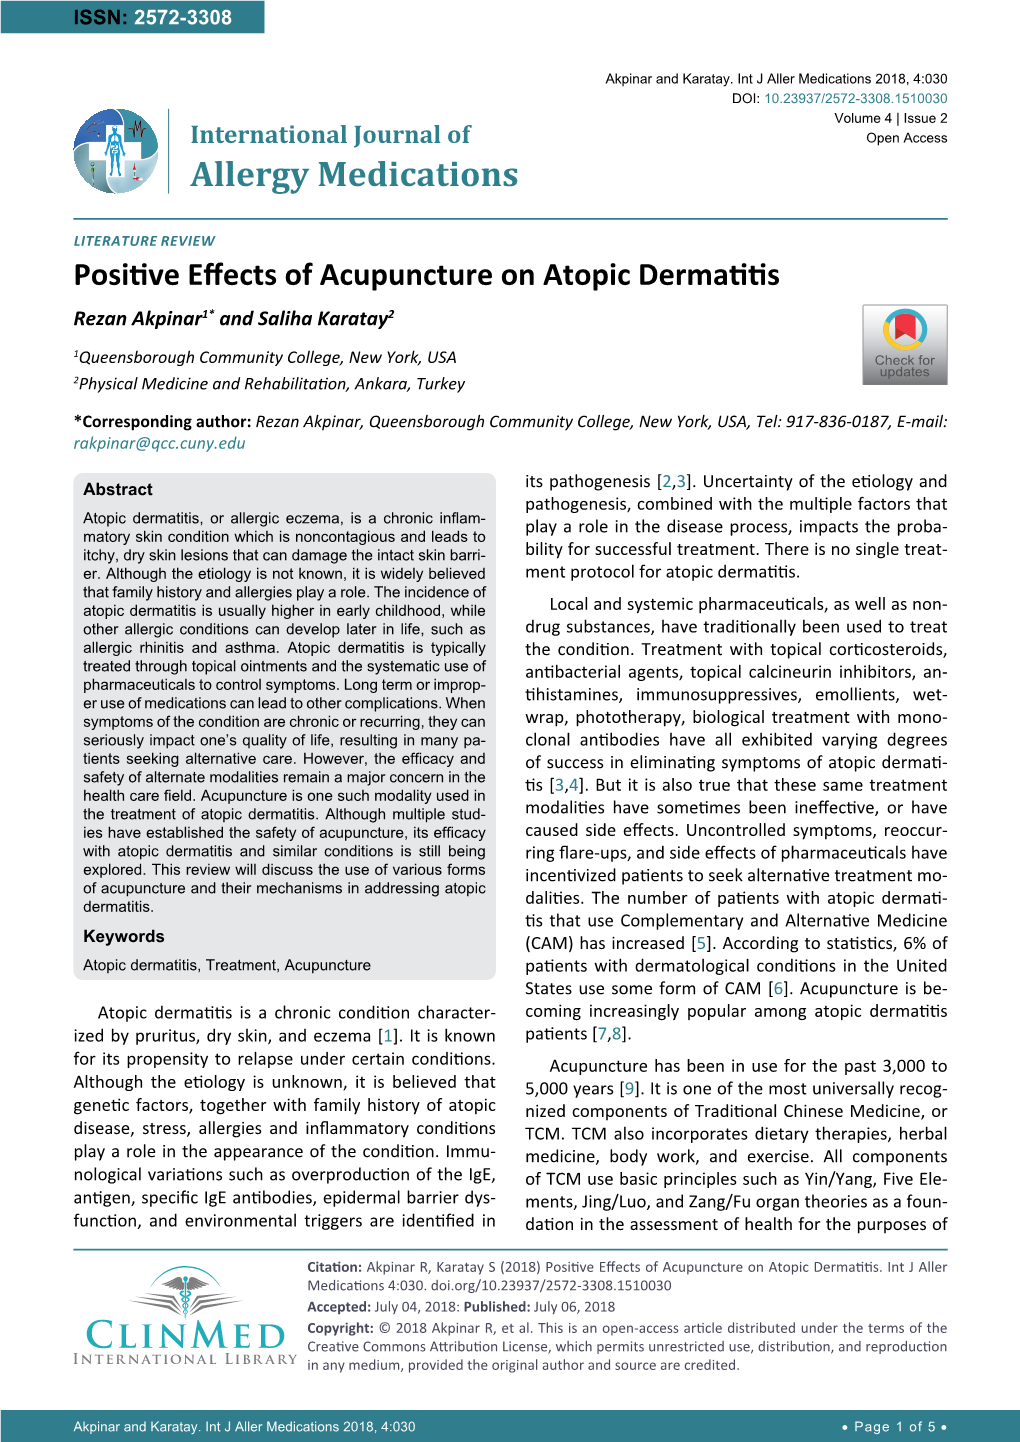 Positive Effects of Acupuncture on Atopic Dermatitis Rezan Akpinar1* and Saliha Karatay2